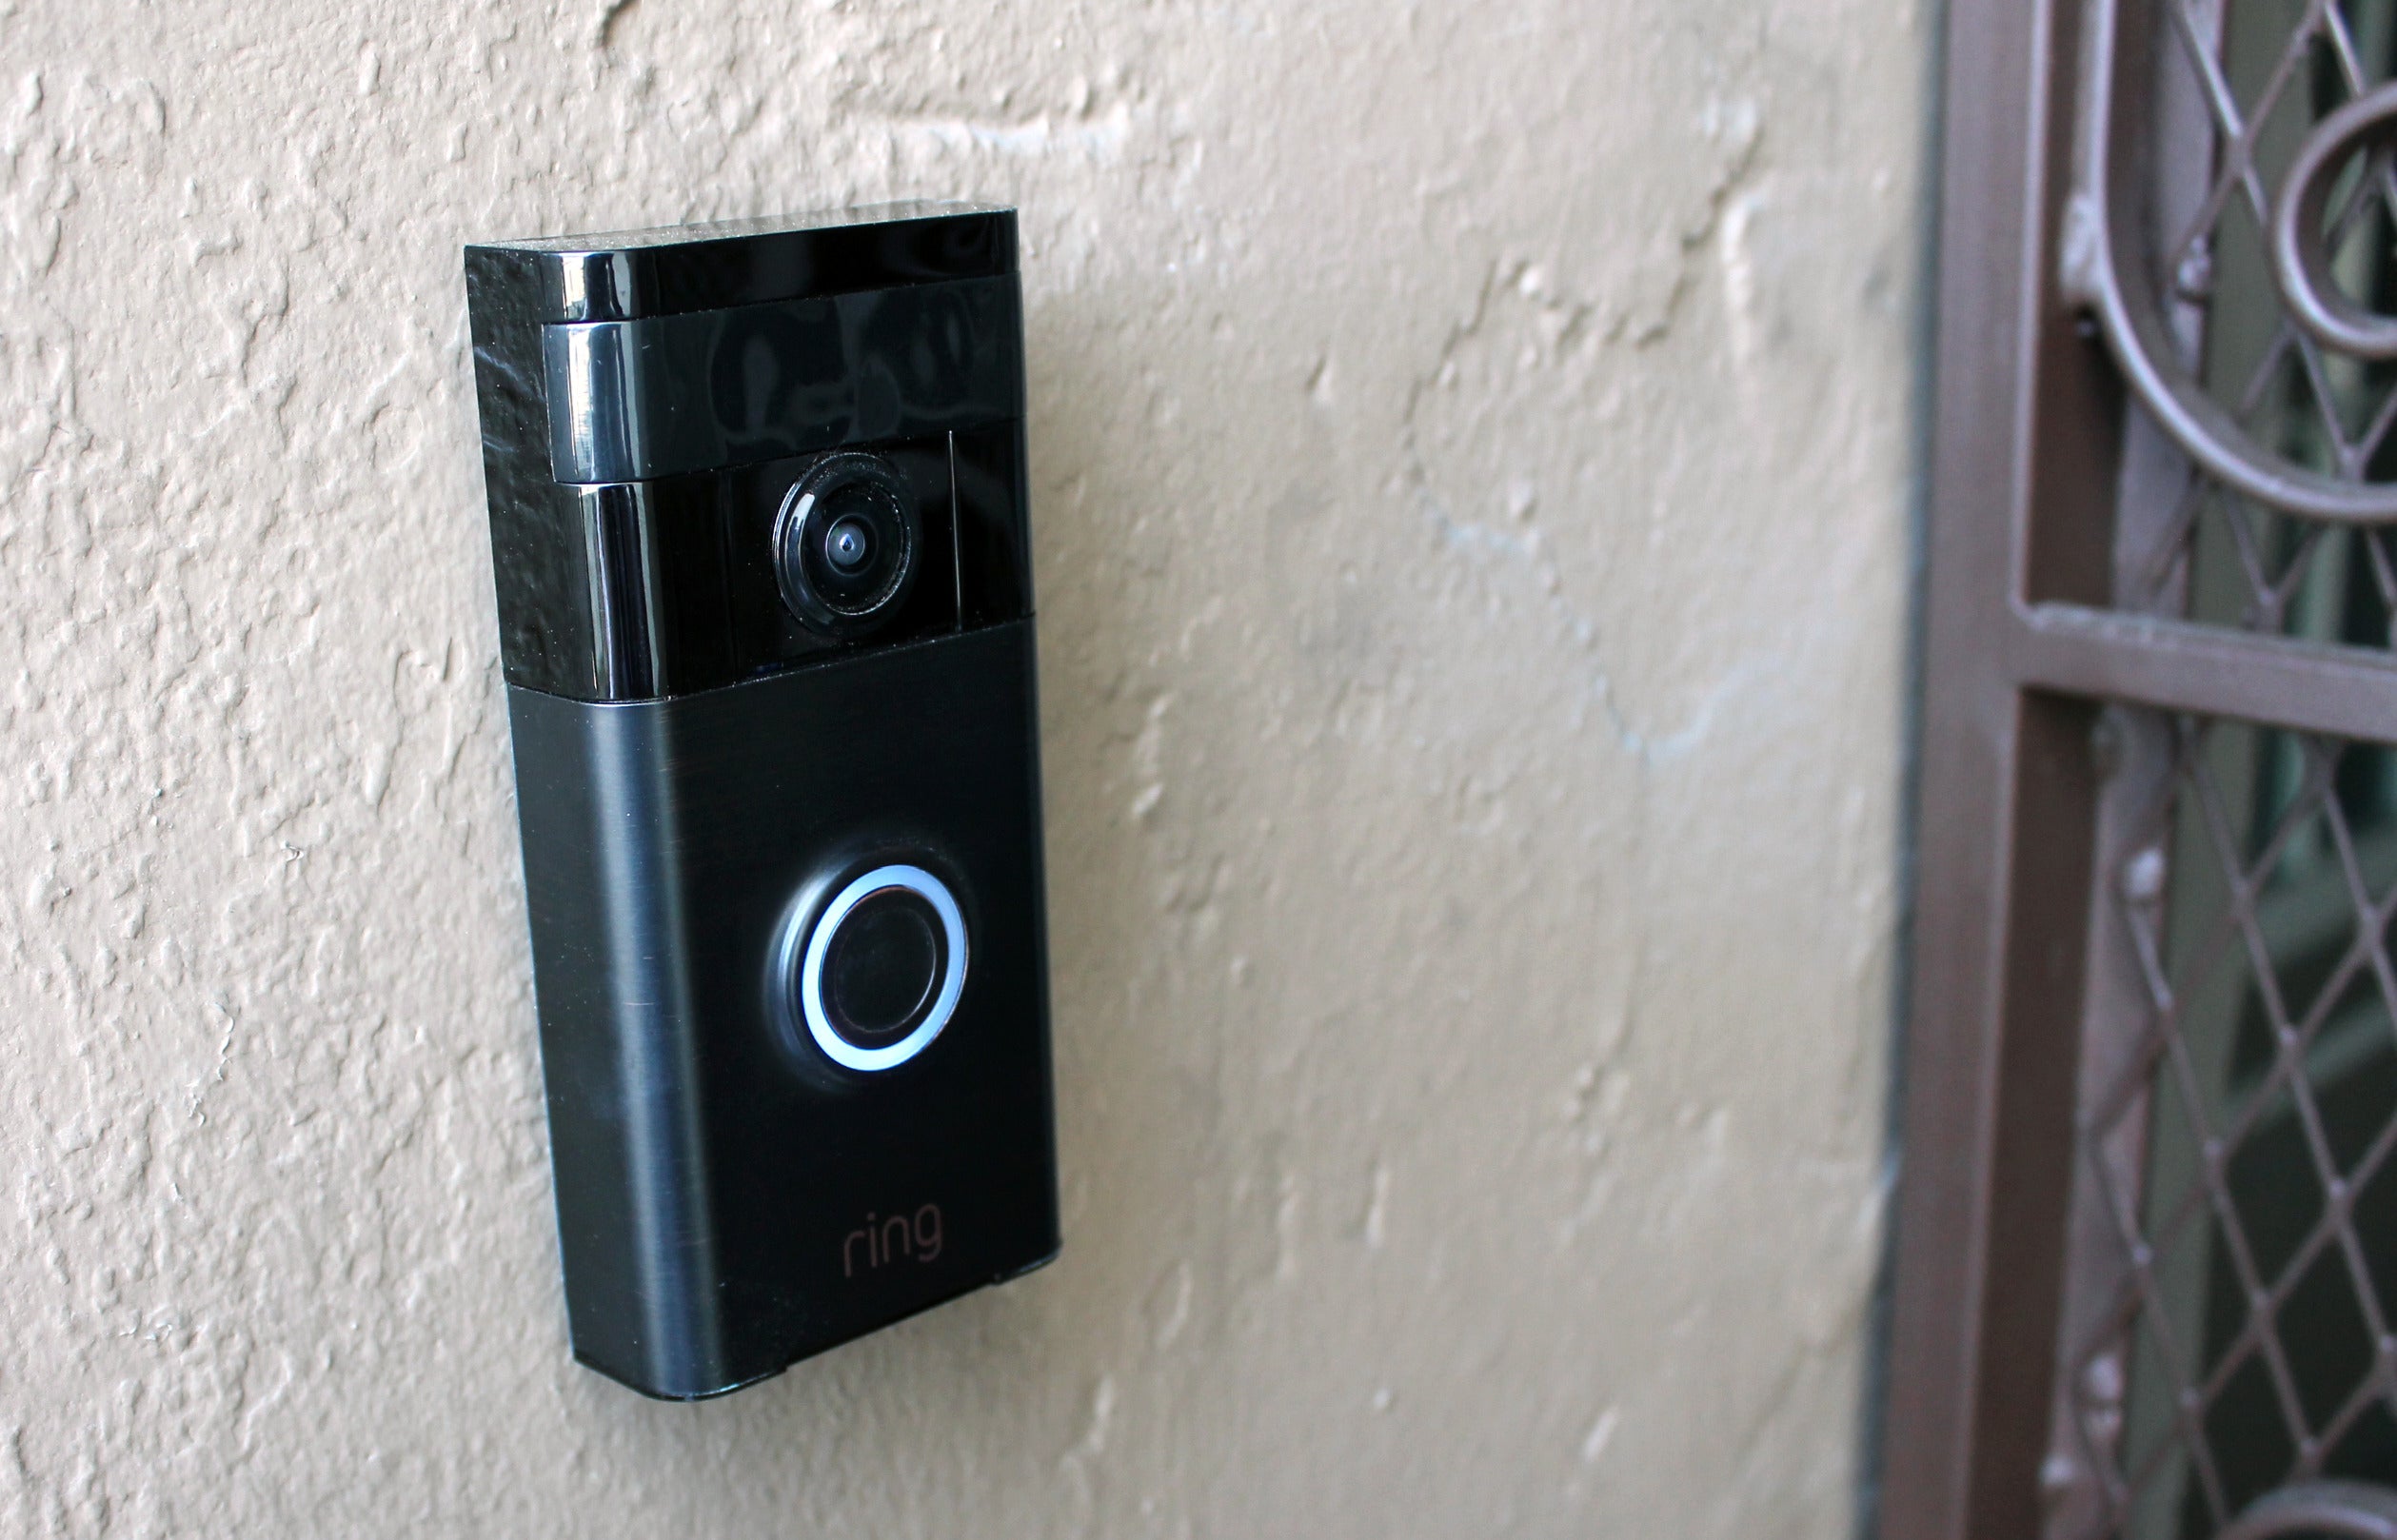 Ring Video Doorbell review: This gadget crooks think you're home | TechHive